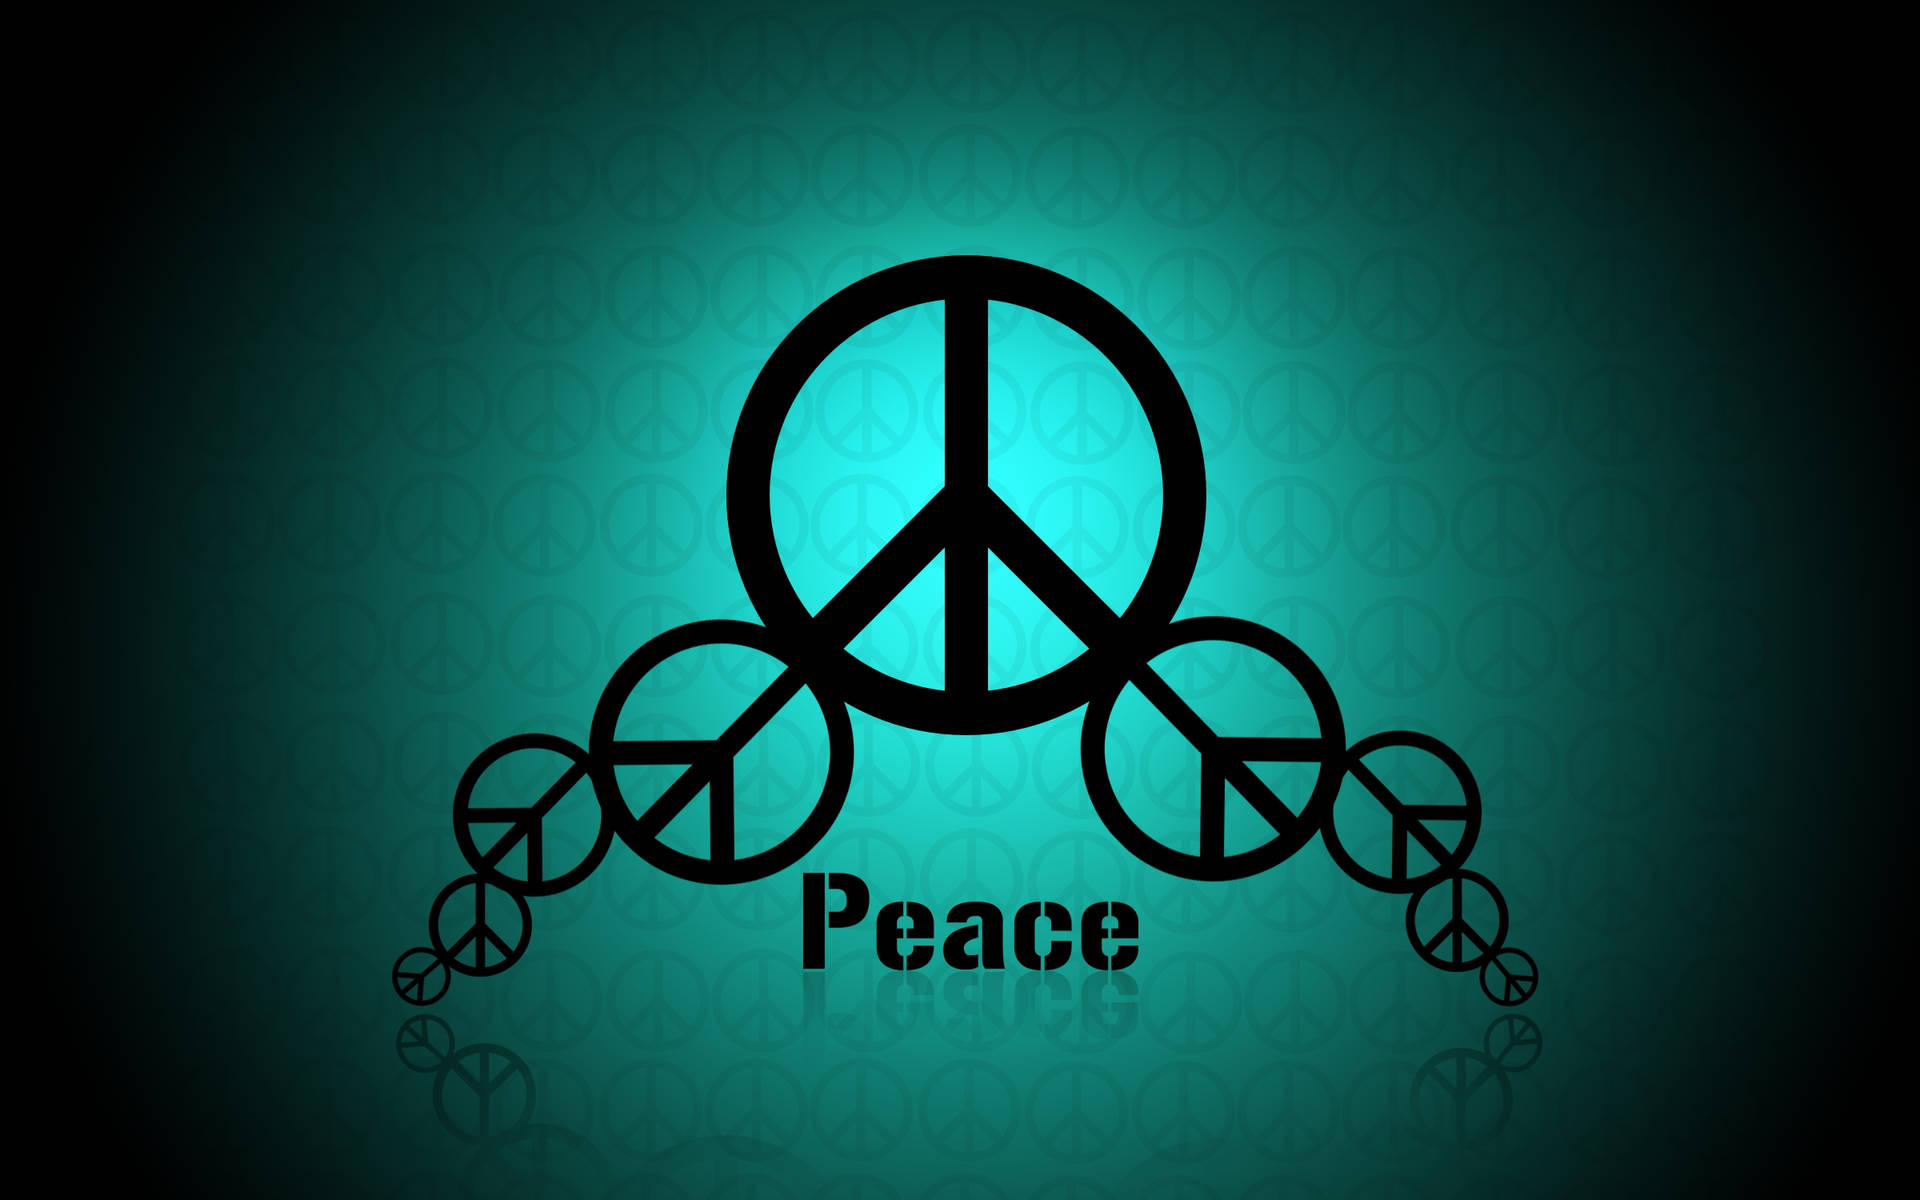 Teal Peace Pyramid Background